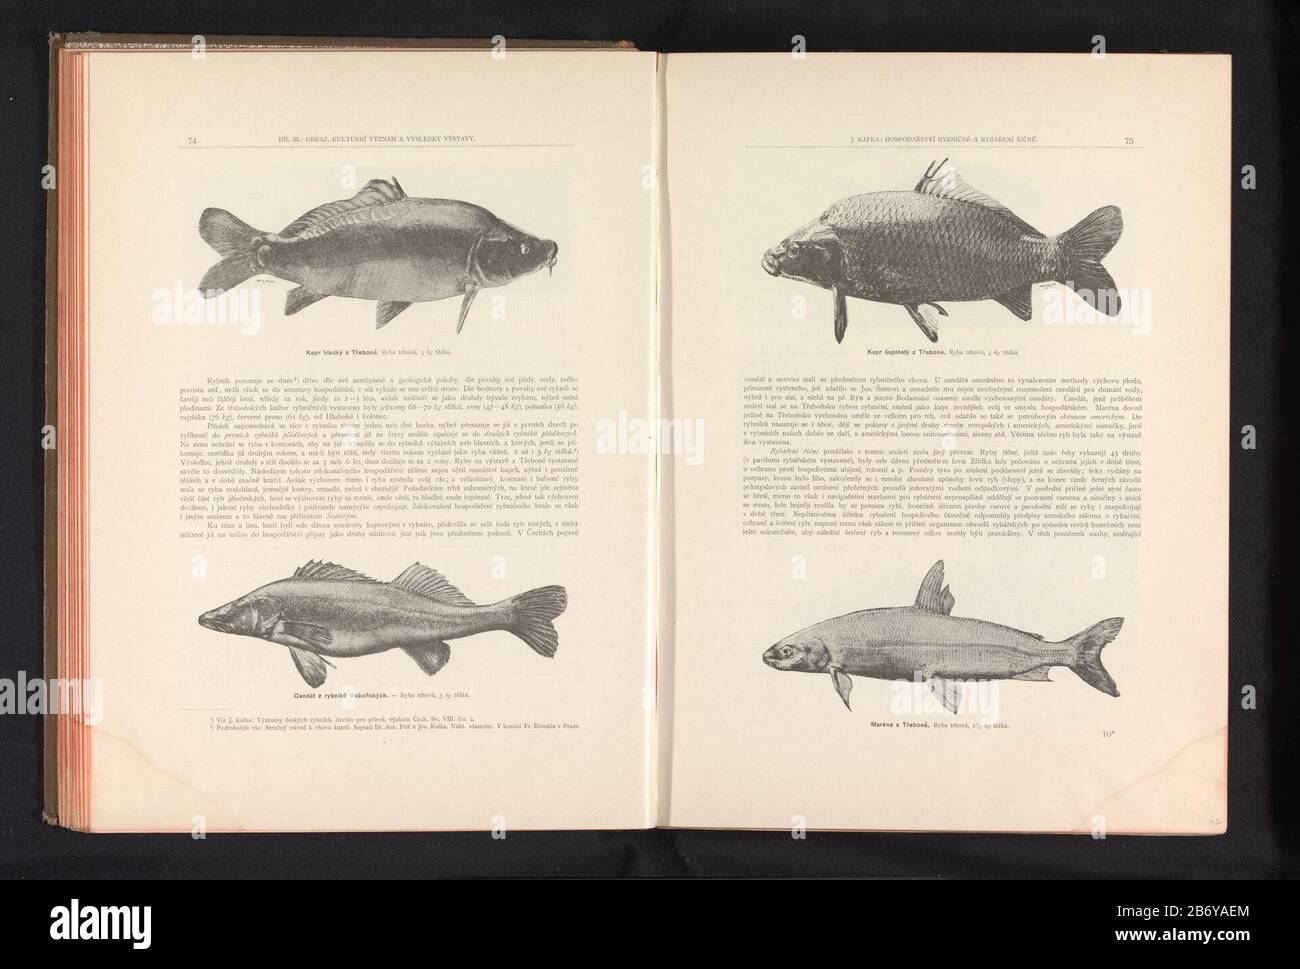 Carp and a large mareneKapr supinatý z Trebone (title object) marena z Trebone (title object) Object Type: photomechanical printing page Object number: RP-F-2001-7-749B-32 Manufacturer : photographer: anoniemclichémaker : Carl Bellmann Place manufacture: Prague Dating: ca. 1891 - in or in front 1895 Material: paper Technique: autotypie Dimensions: page: h 372 mm × W 270 mm Explanation Prints on page 75. Subject: bony fishes: carp fishes Stock Photo